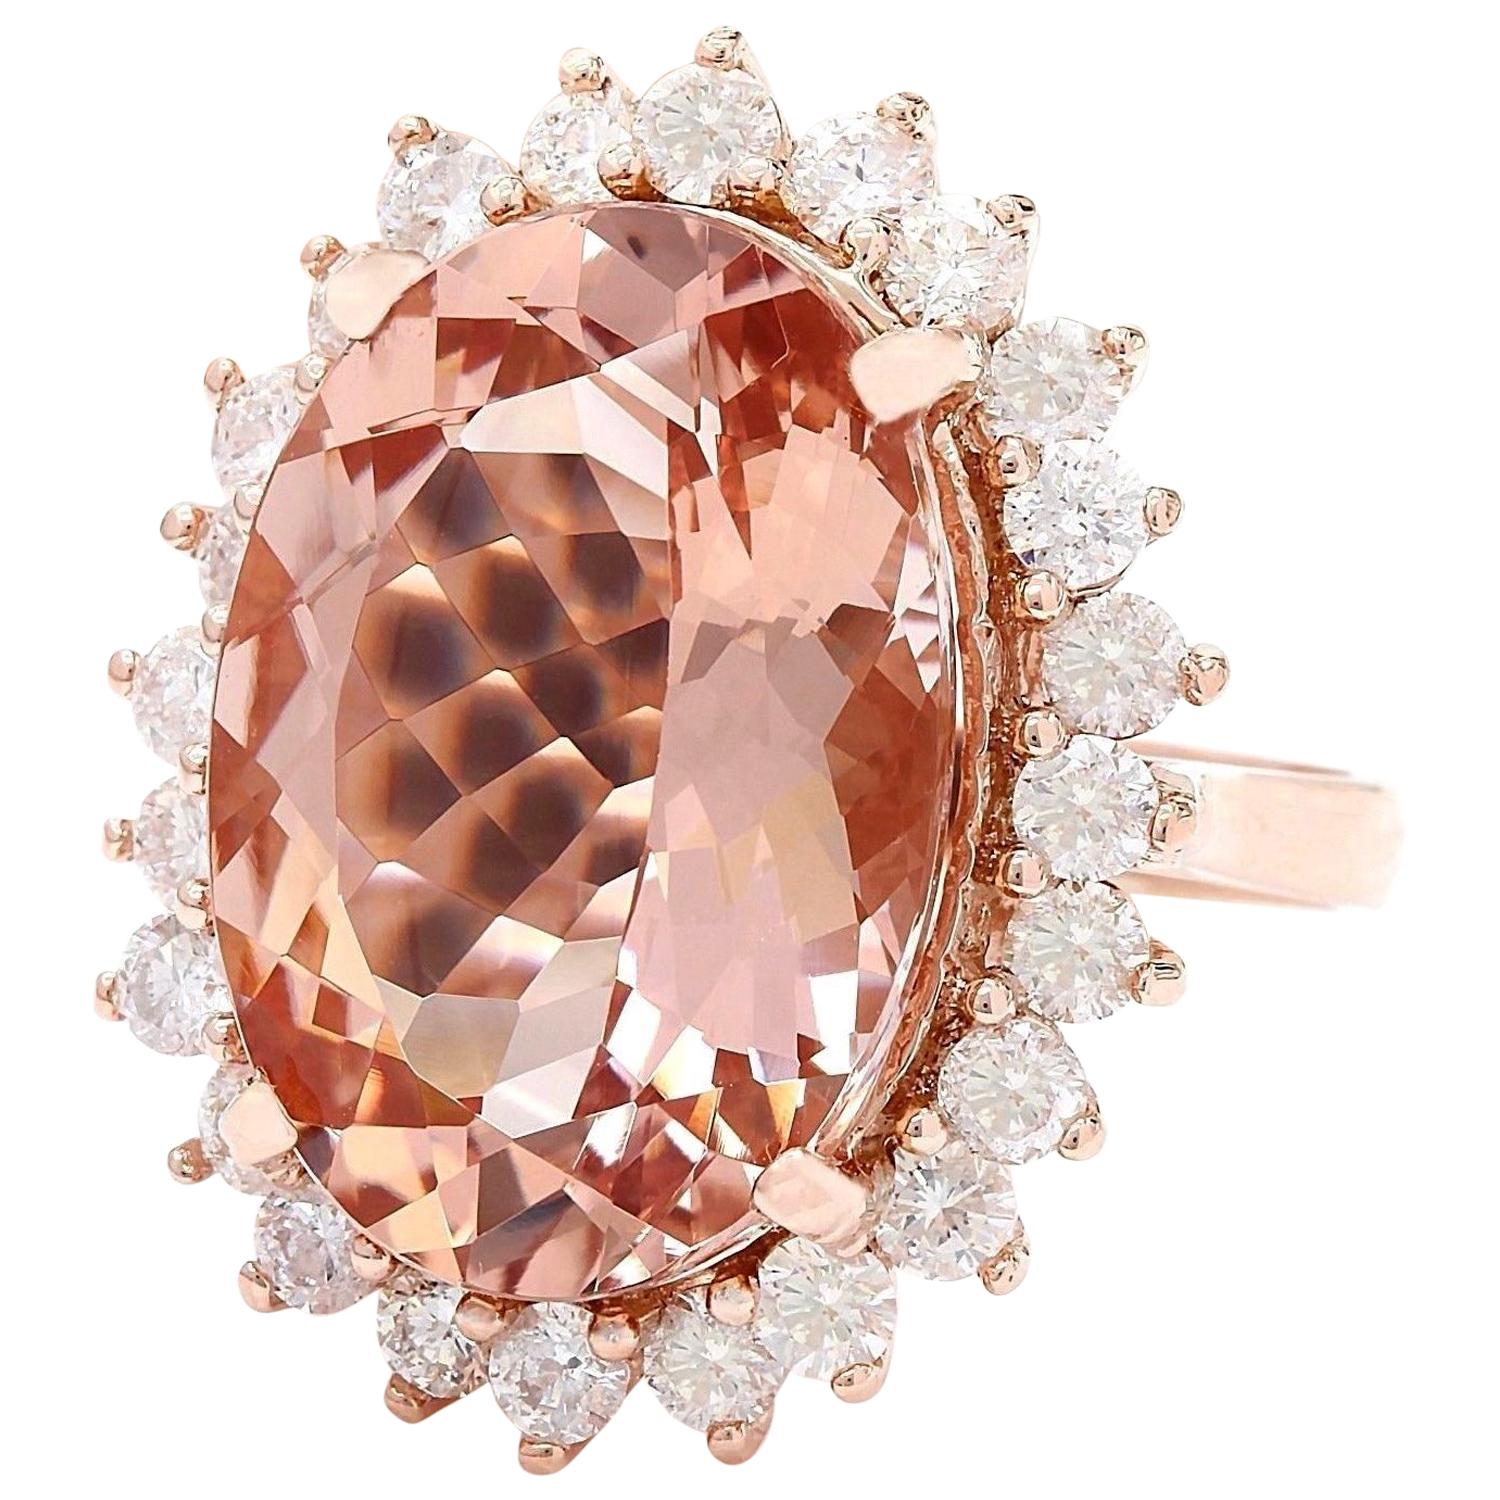 13.68 Carat Natural Morganite 14K Solid Rose Gold Diamond Ring
 Item Type: Ring
 Item Style: Cocktail
 Material: 14K Rose Gold
 Mainstone: Morganite
 Stone Color: Peach
 Stone Weight: 12.08 Carat
 Stone Shape: Oval
 Stone Quantity: 1
 Stone